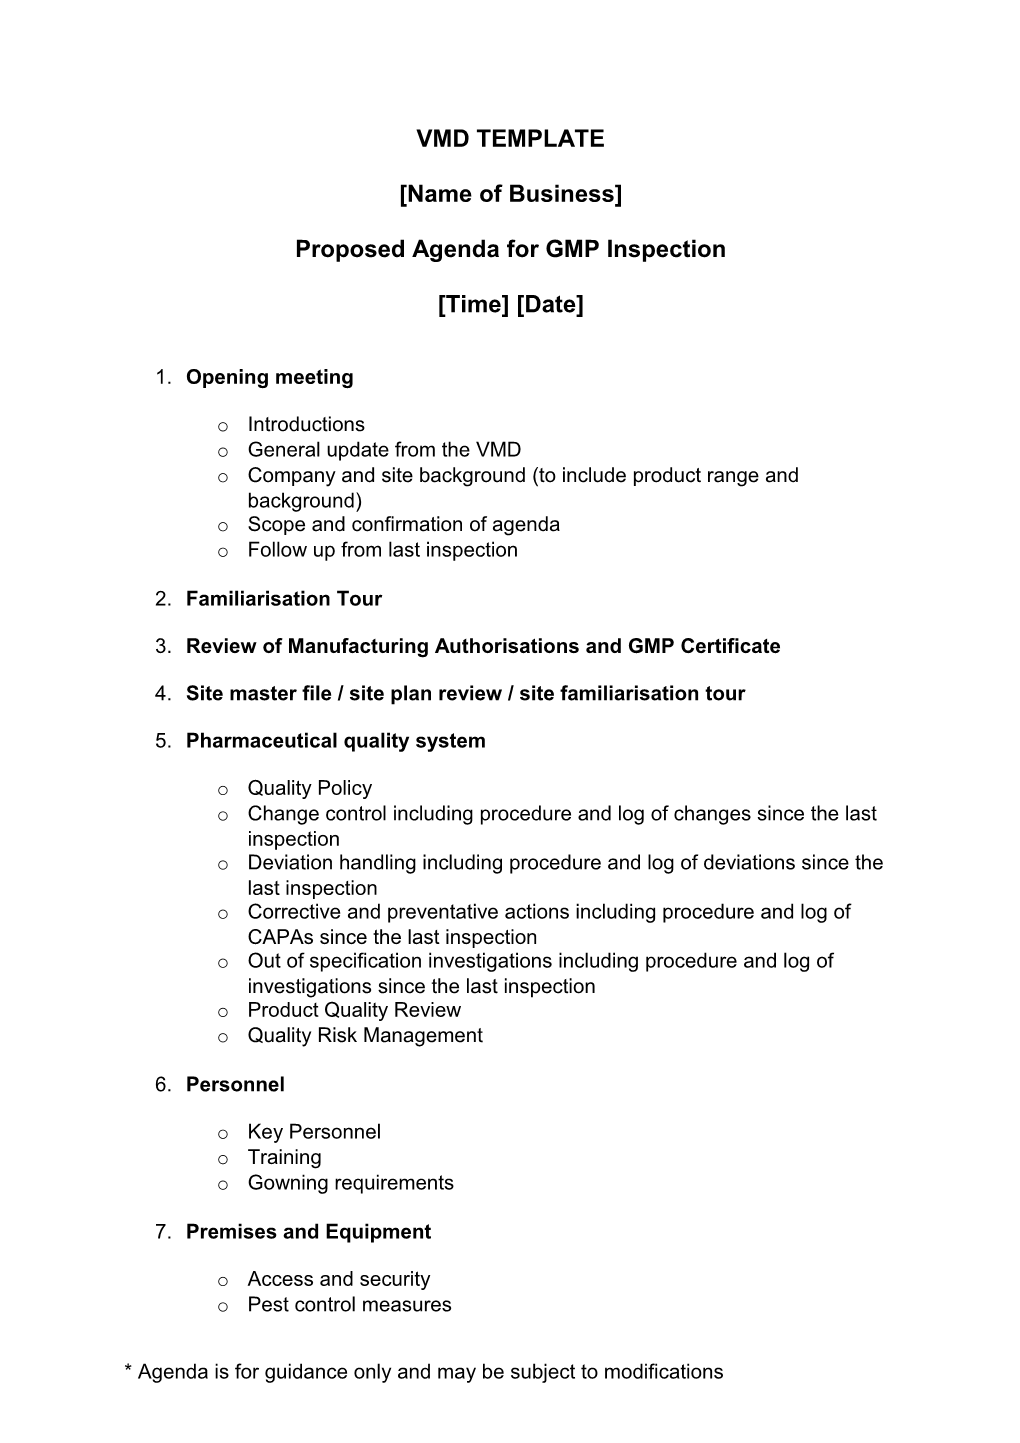 Proposed Agenda for GMP Inspection